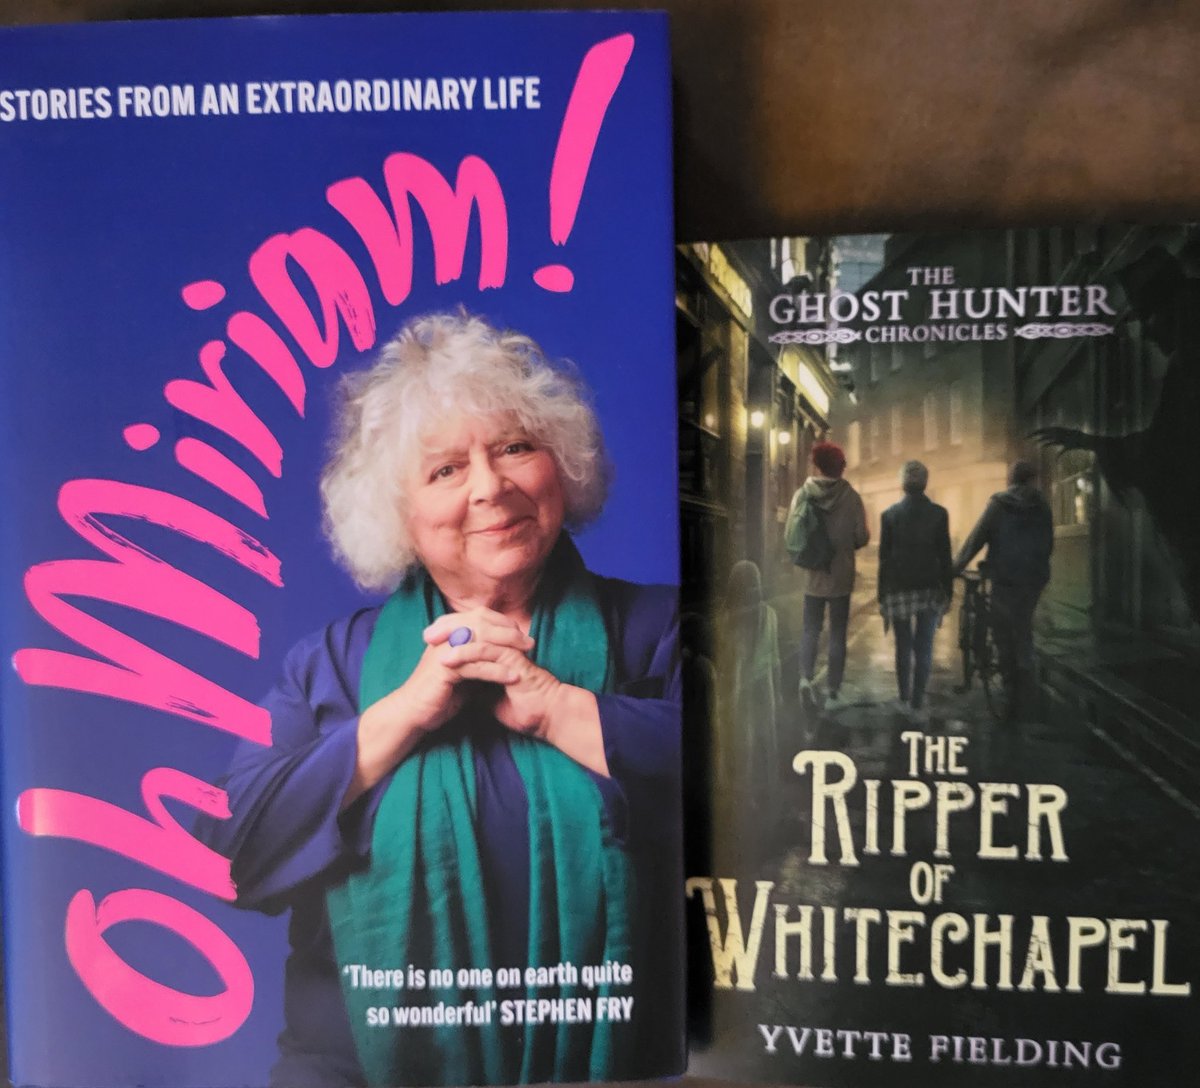 Since I'm getting bored of being pretty much housebound lately himself has treated me to these to keep me occupied when he's at work (and at mine). Thank you. #miriammargolyes #yvettefielding #theripperofwhitechapel